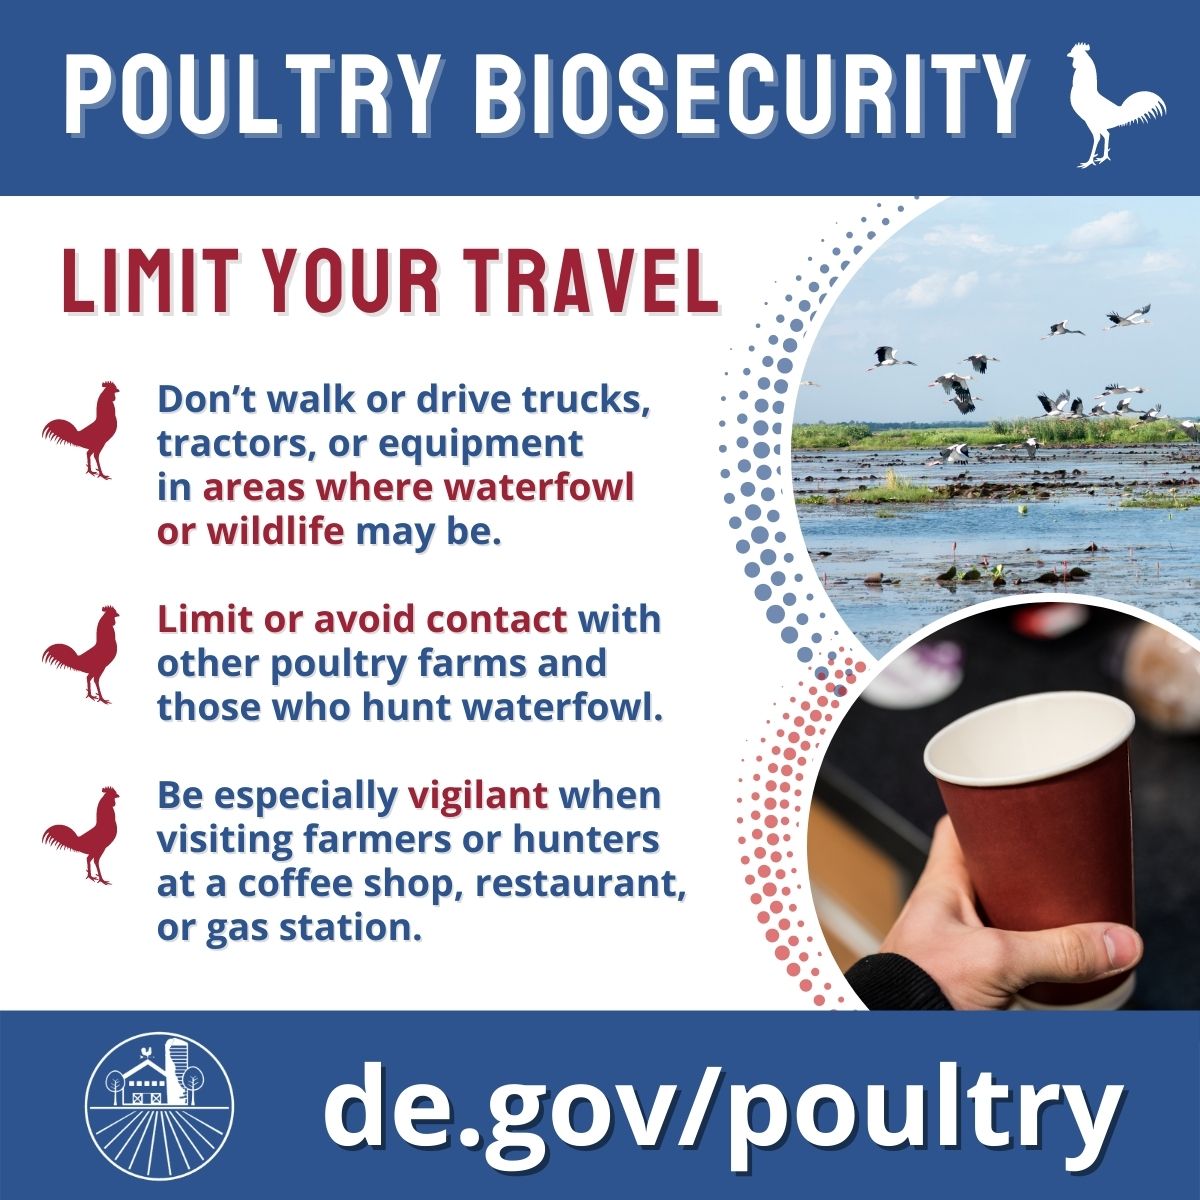 High Path Avian Influenza Confirmed In Black Vultures, Poultry Producers  Encouraged To Take Precautions - State of Delaware News